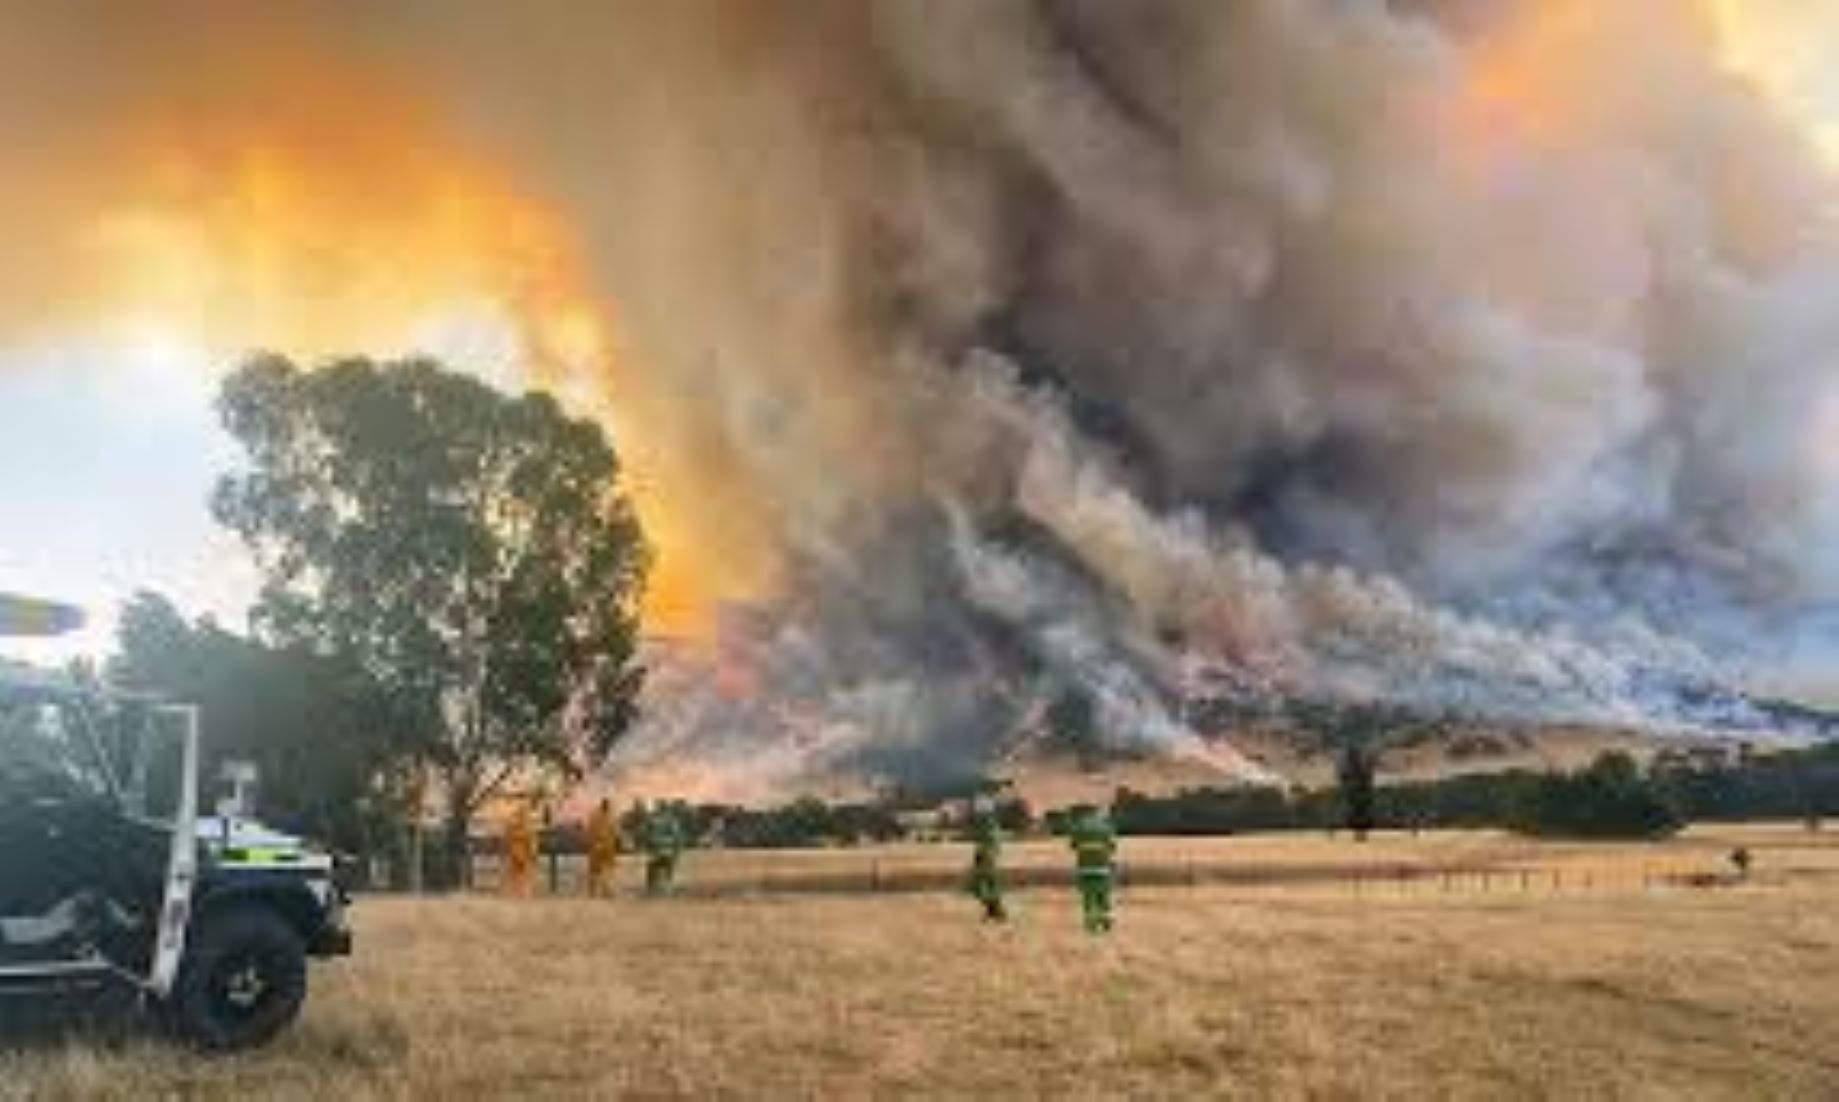 Australia’s Densely Populated States To See Above Normal Bushfire Potential This Summer